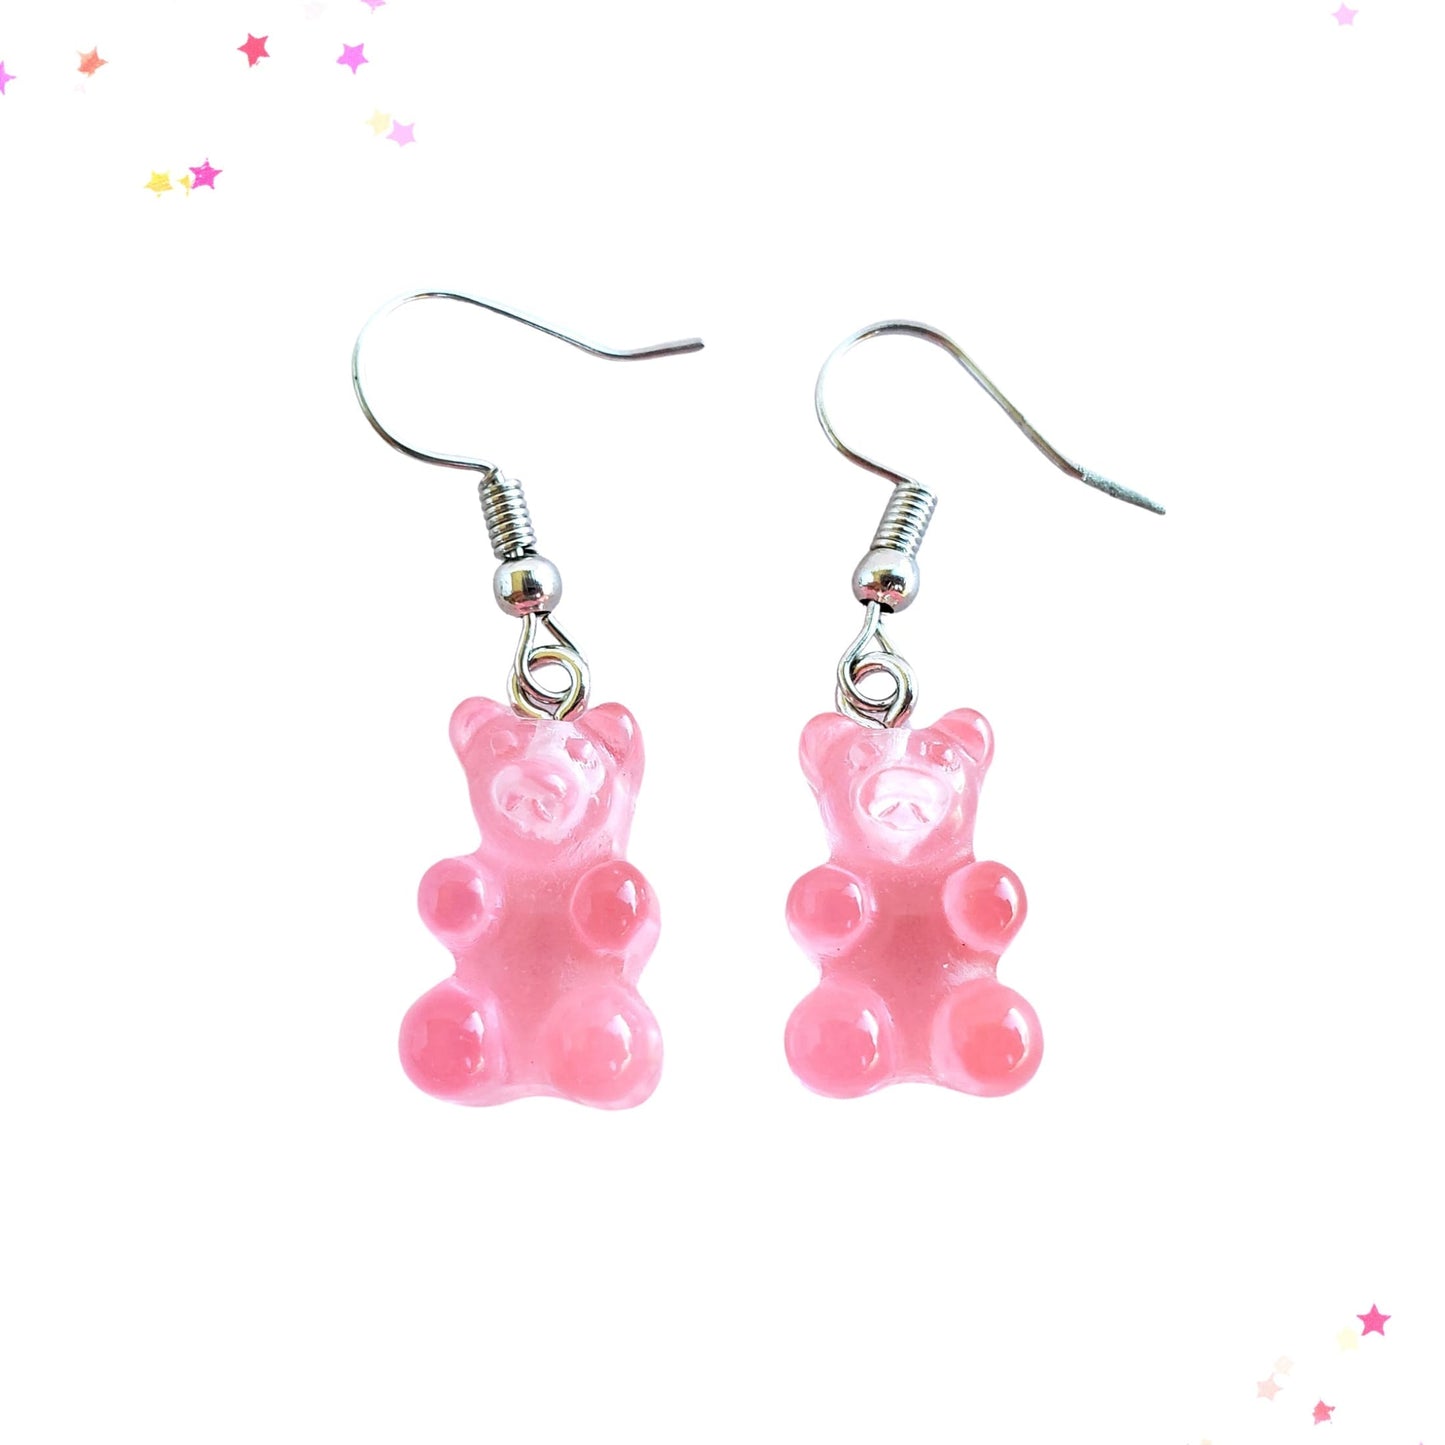 Gummy Bear Drop Earrings in Cotton Candy from Confetti Kitty, Only 3.99